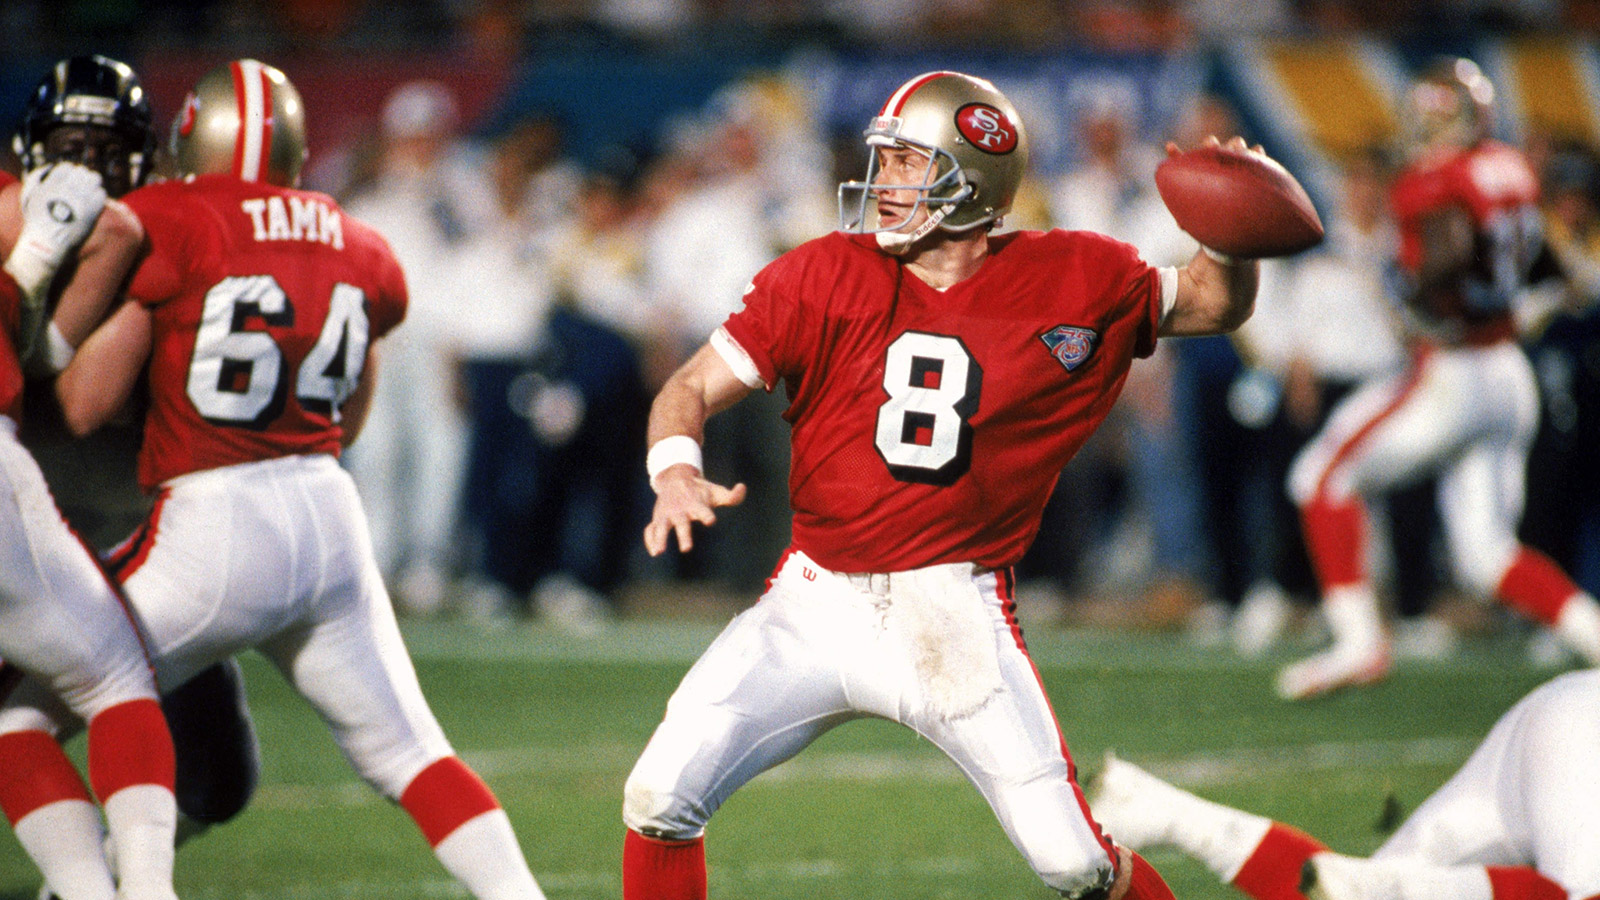 San Francisco 49ers quarterback Steve Young drops back to pass during Super Bowl XXIX against the San Diego Chargers in 1995. The 49ers won 49-26. 